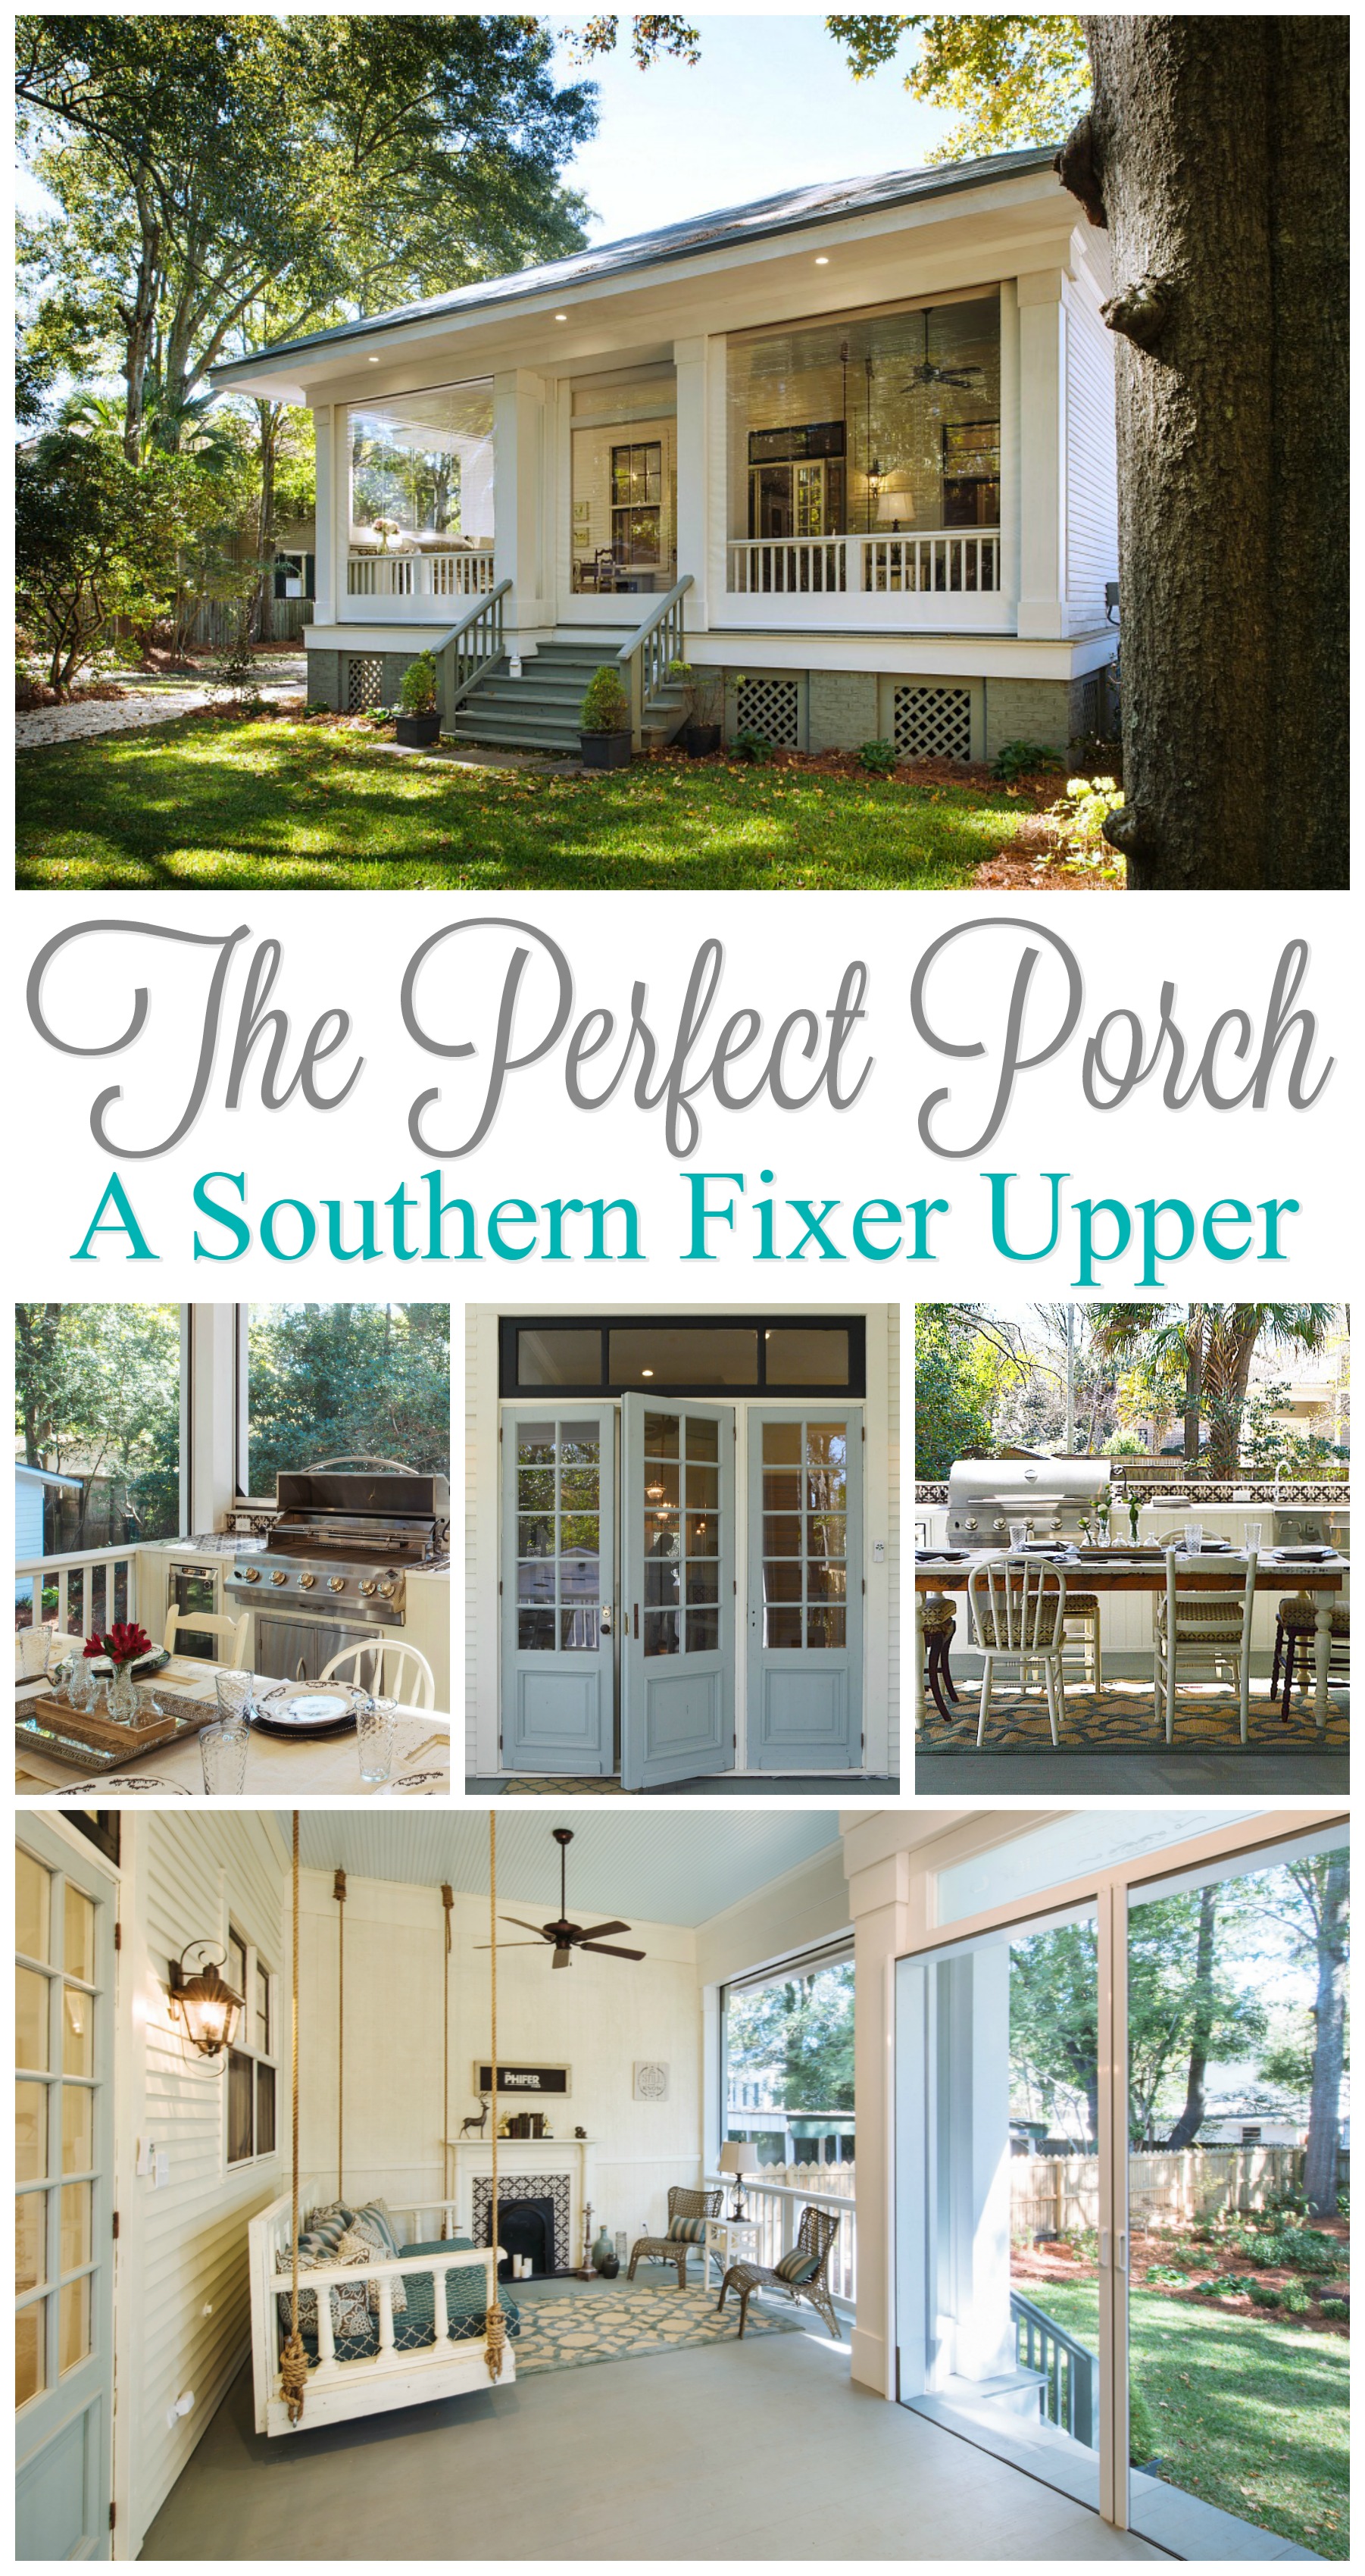 Year round outdoor entertaining with the perfect porch! A Southern fixer upper story. Built in BBQ and outdoor kitchen, daybed swing, ceiling fans...